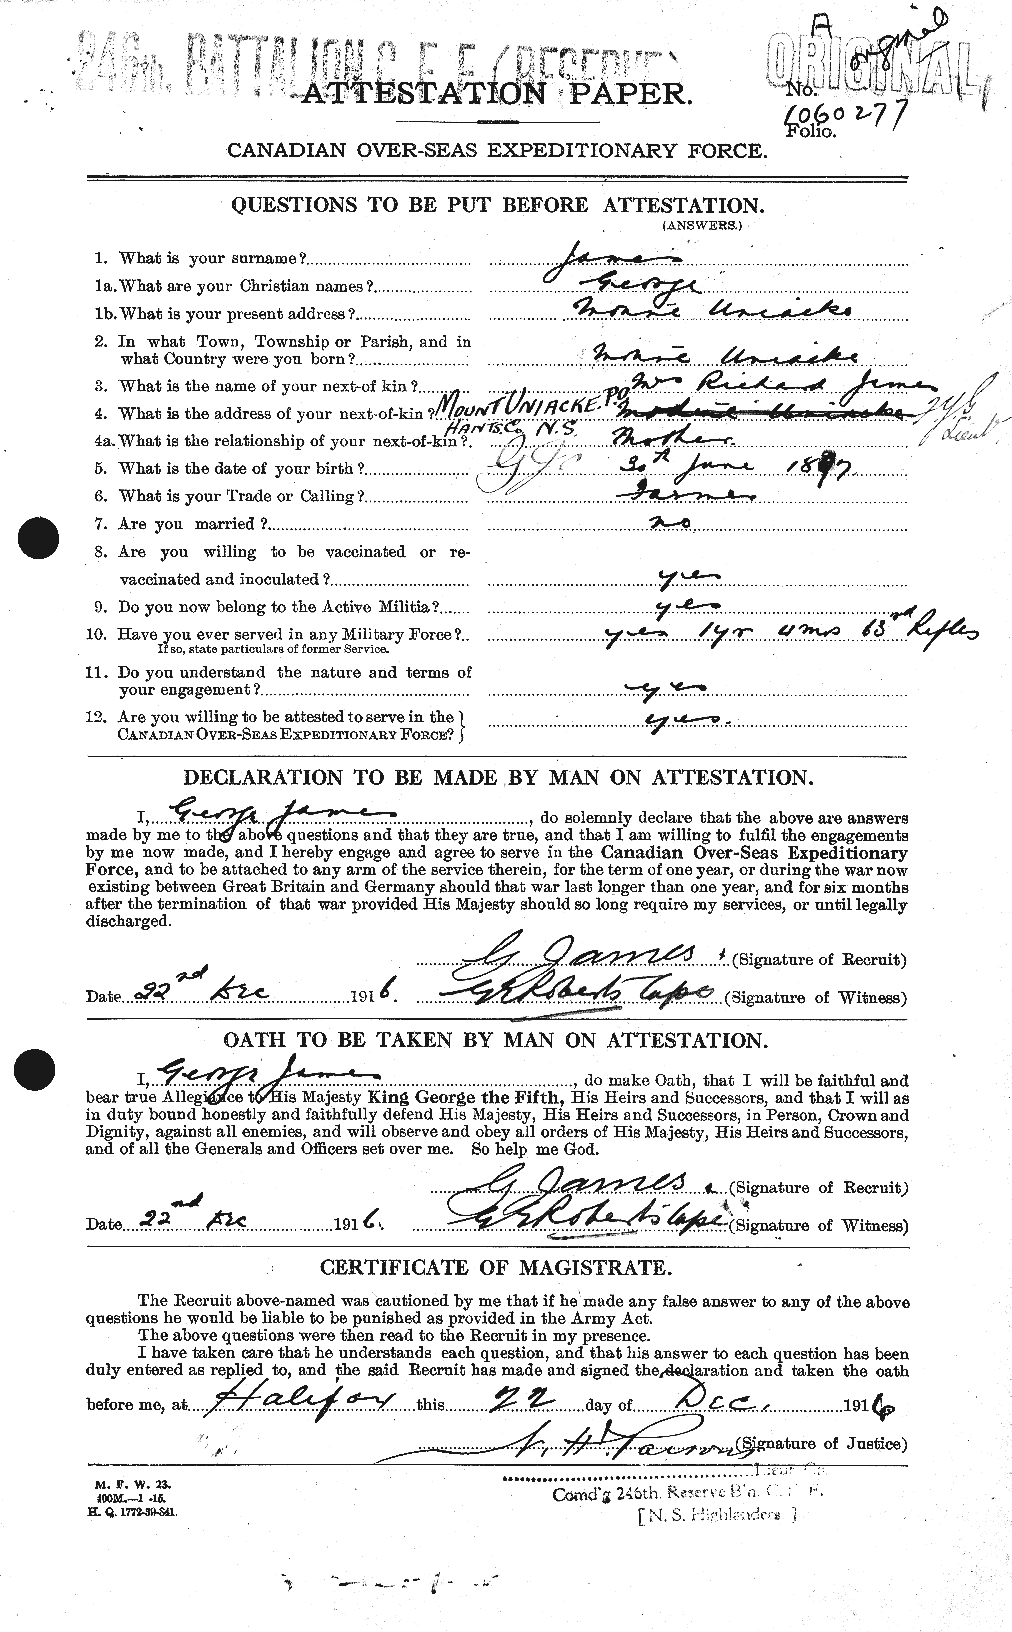 Personnel Records of the First World War - CEF 419382a